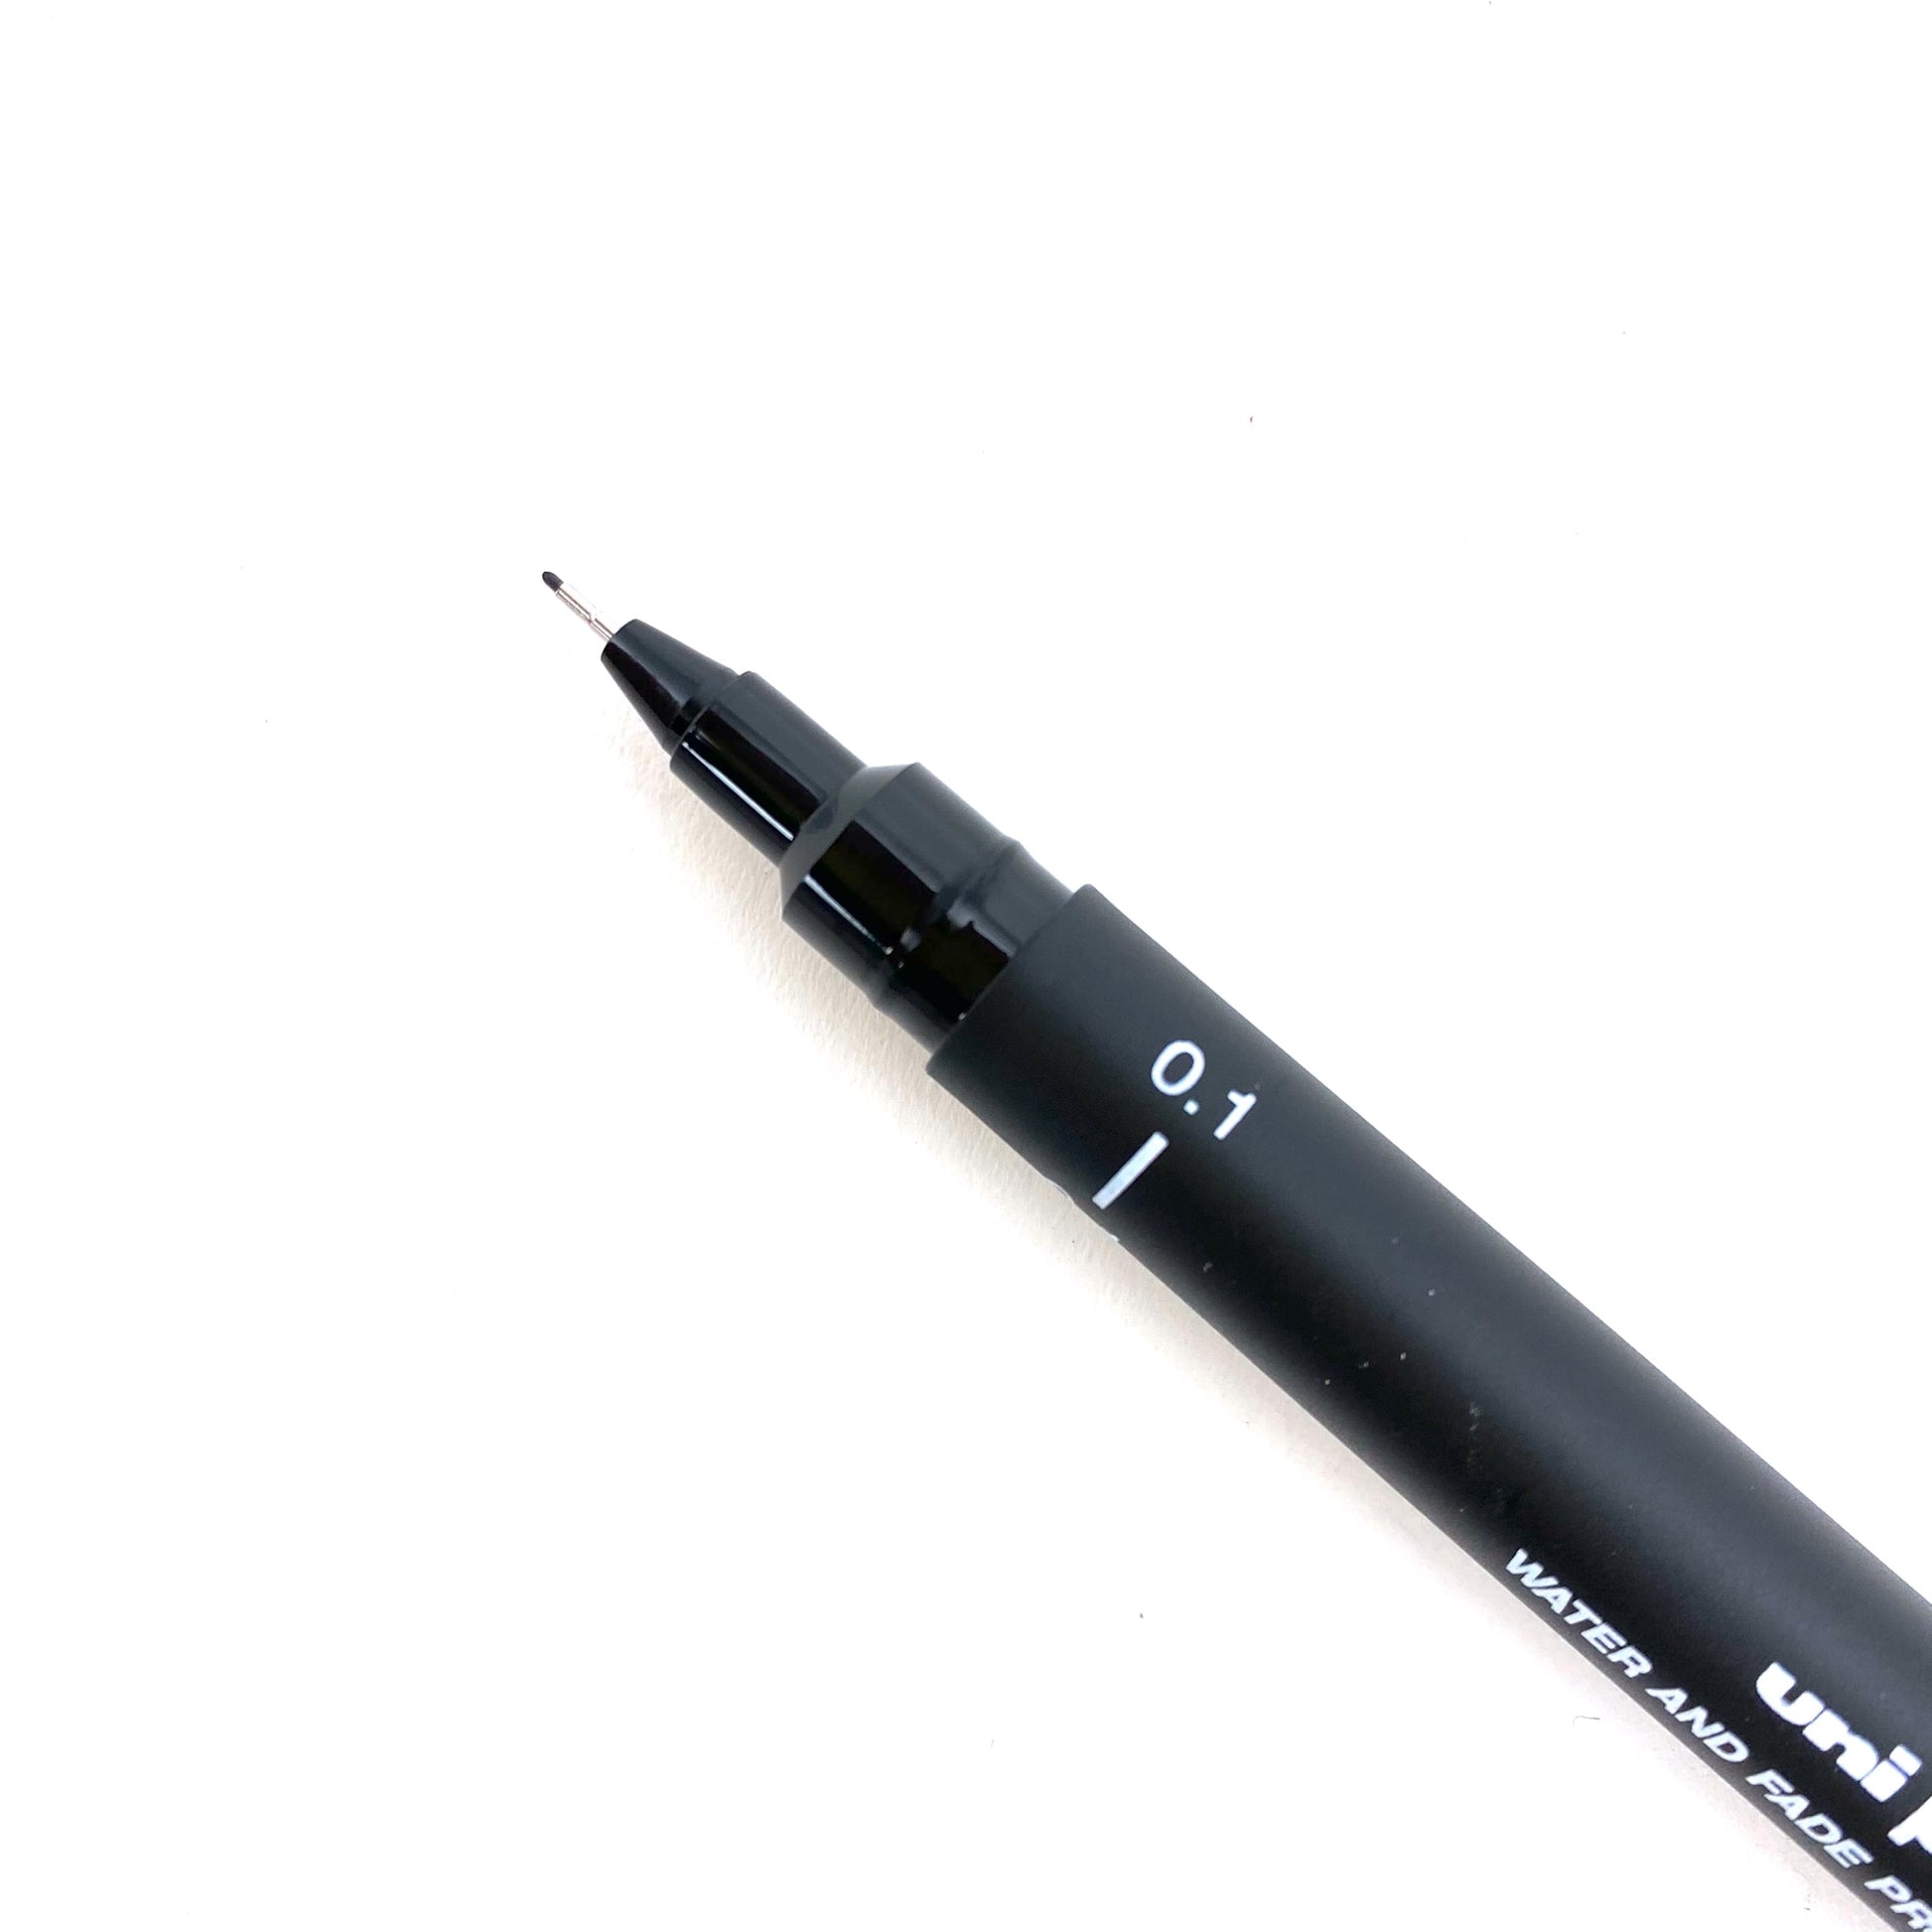 Pin, Fine Line Drawing Pens